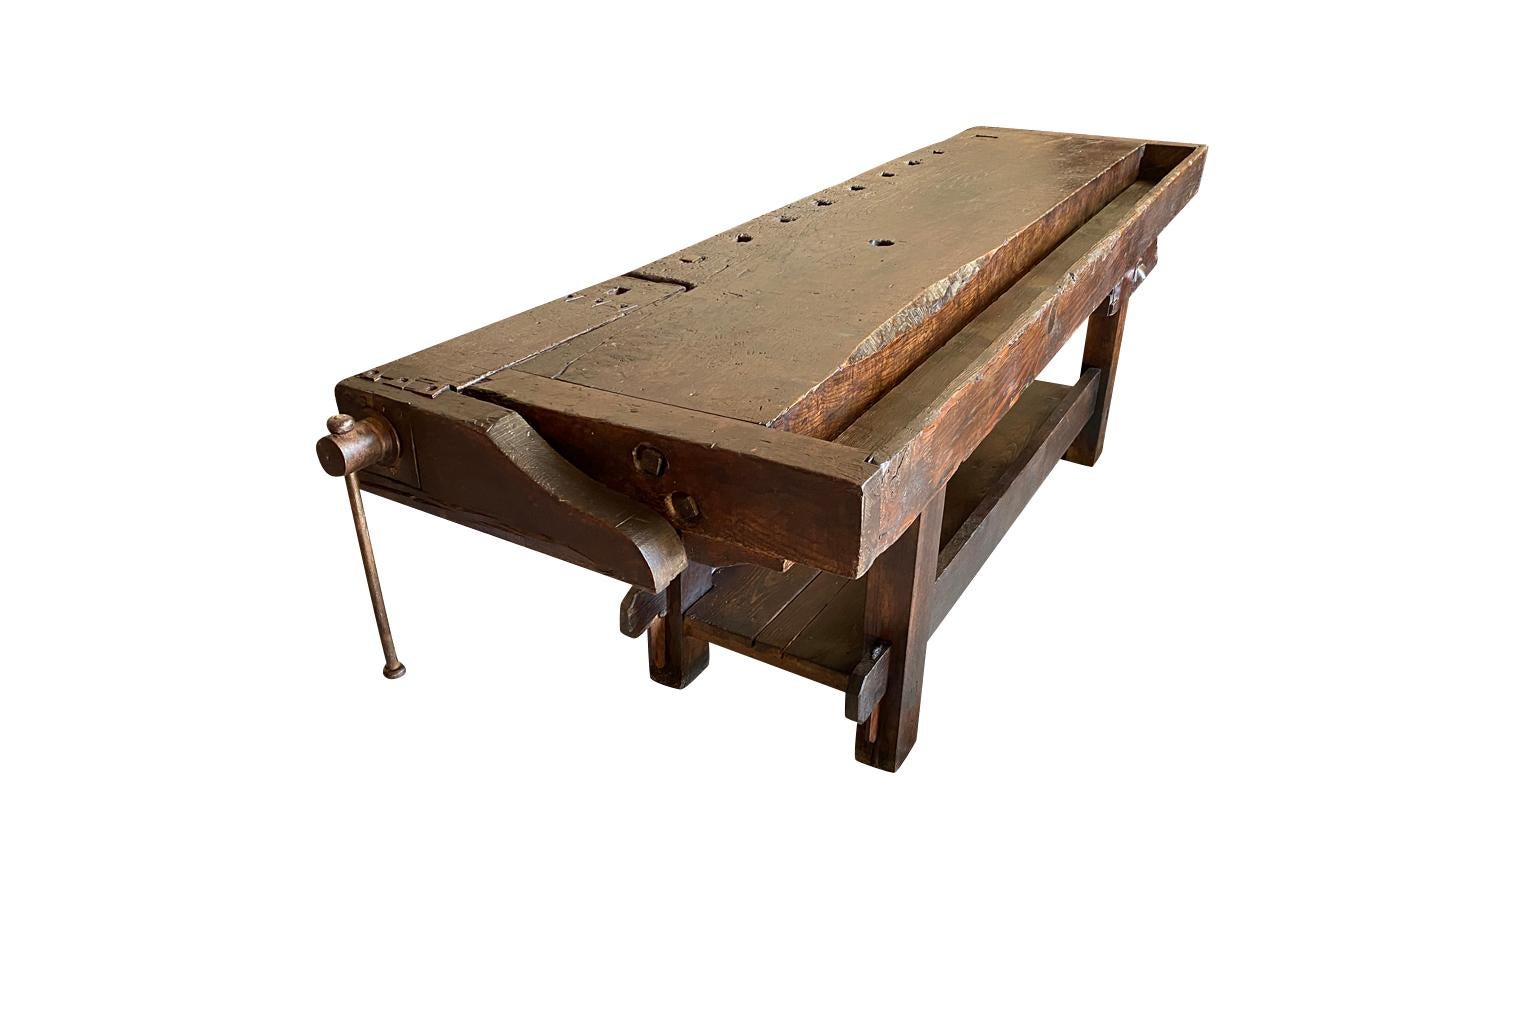 A very handsome 19th century Etabli - Work Table from the South of France.  Soundly constructed from richly stained oak and retaining its original vice.  Terrific as a console table.